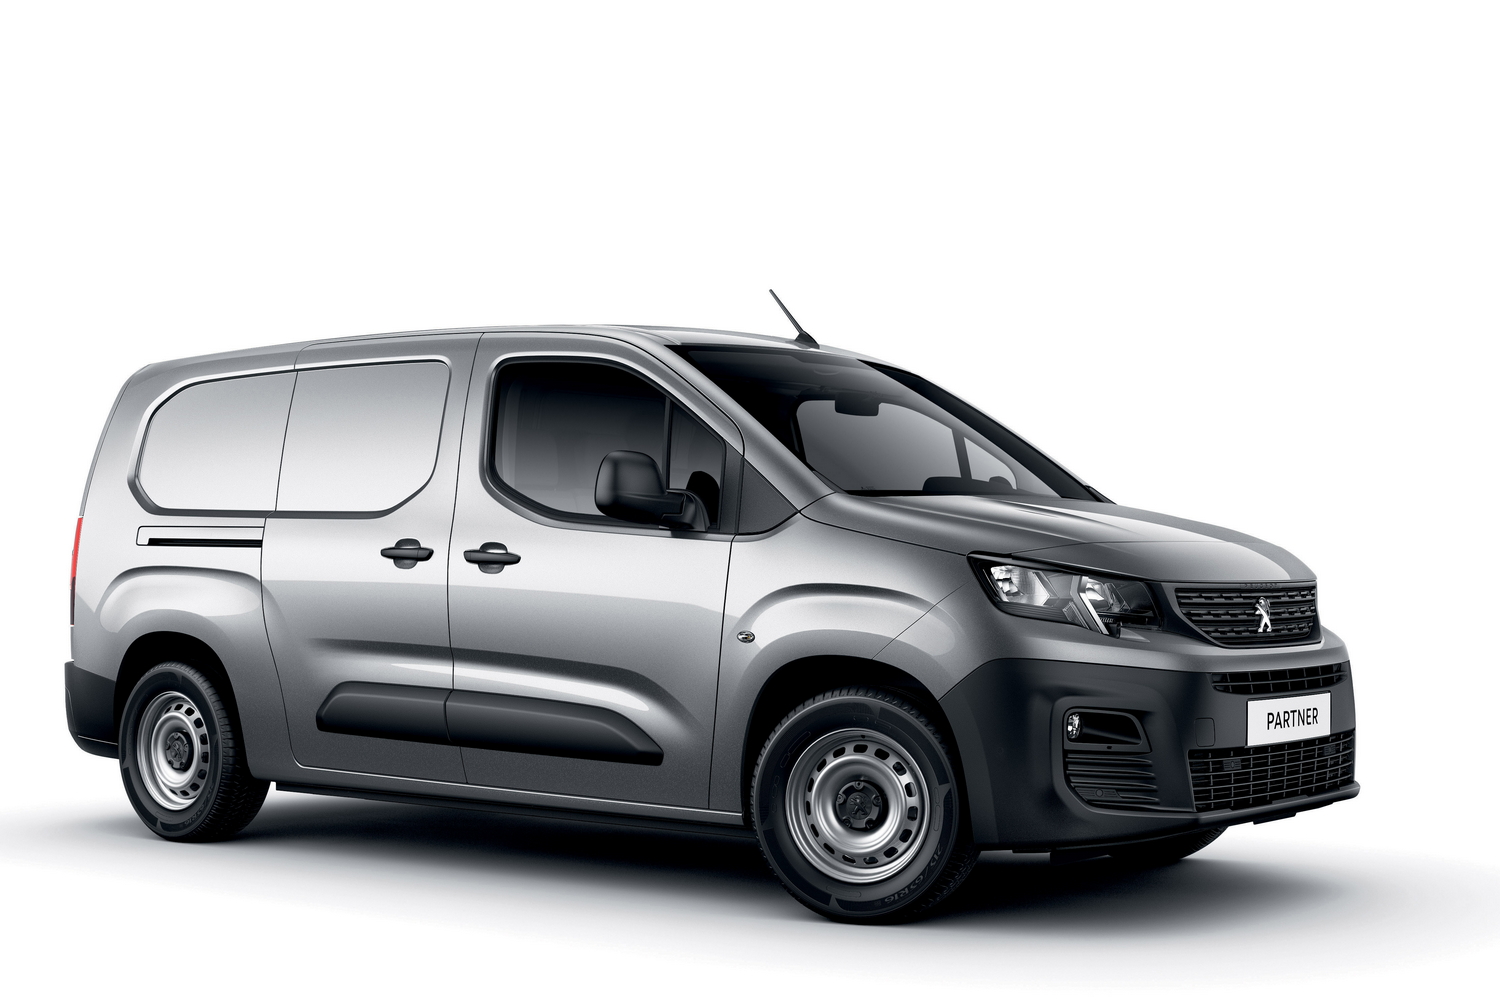 How much to tax a 1.6 Peugeot Partner privately?